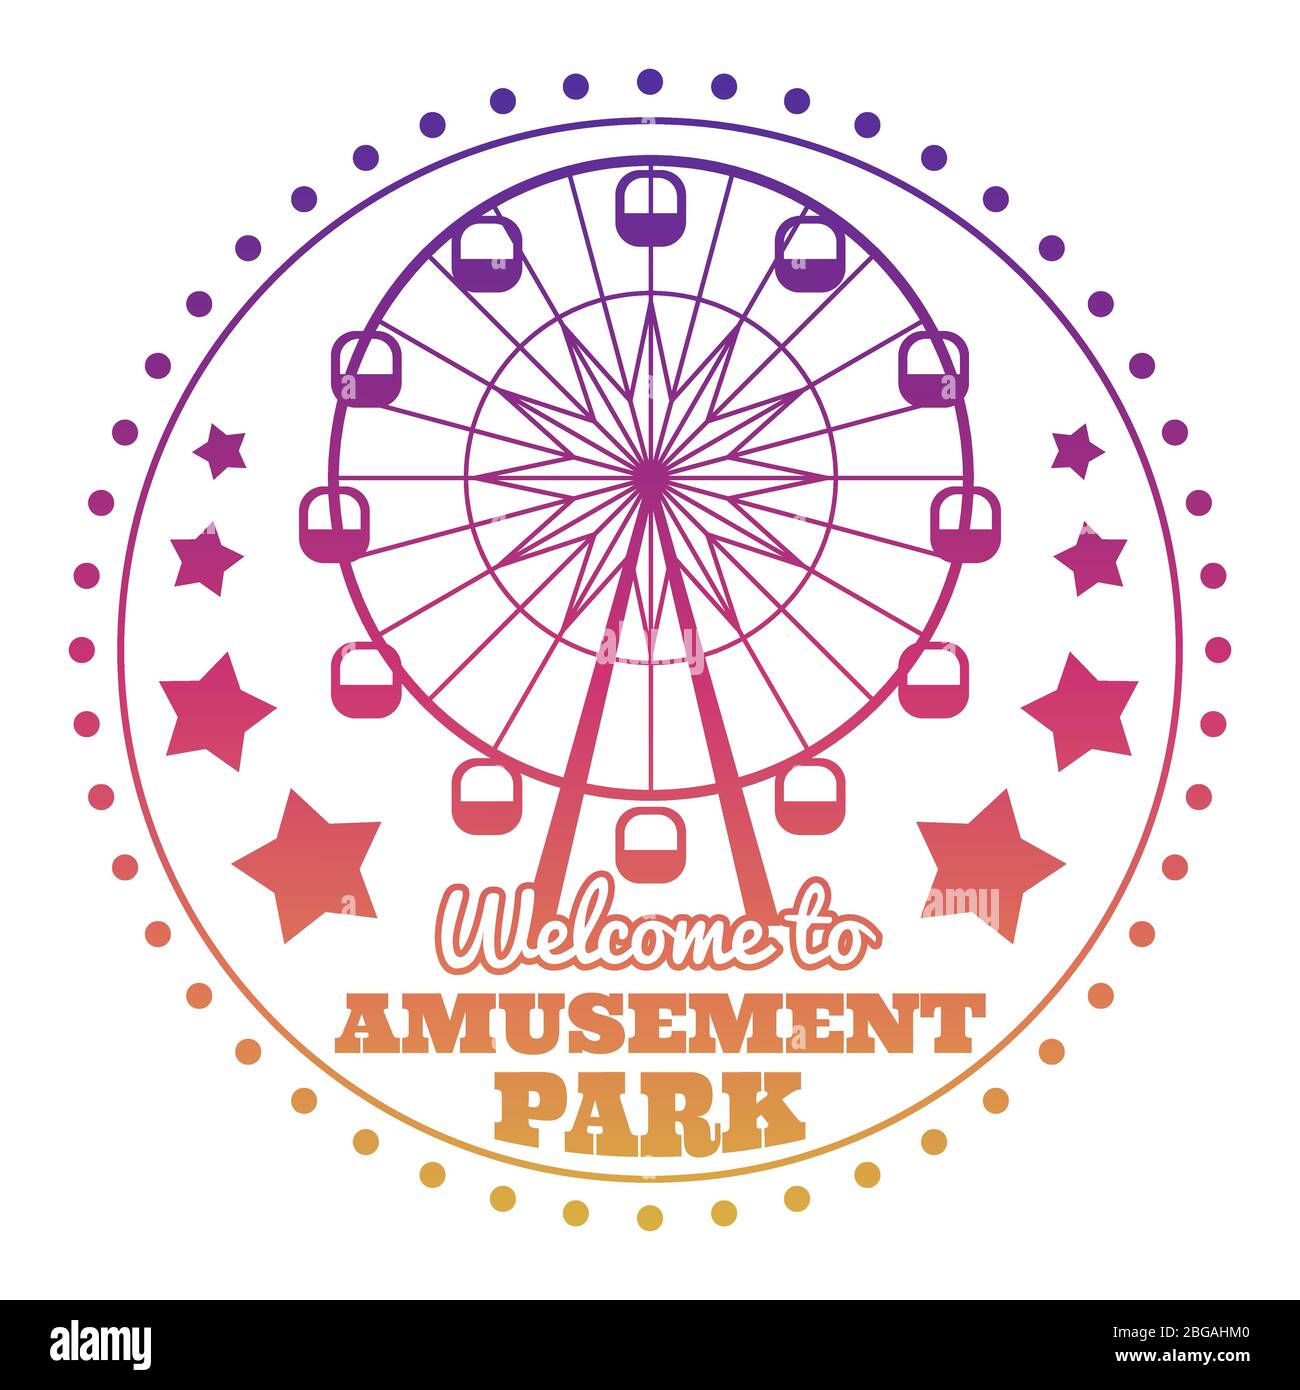 Amusement park welcome emblem logo isolated on white. Vector illustration Stock Vector